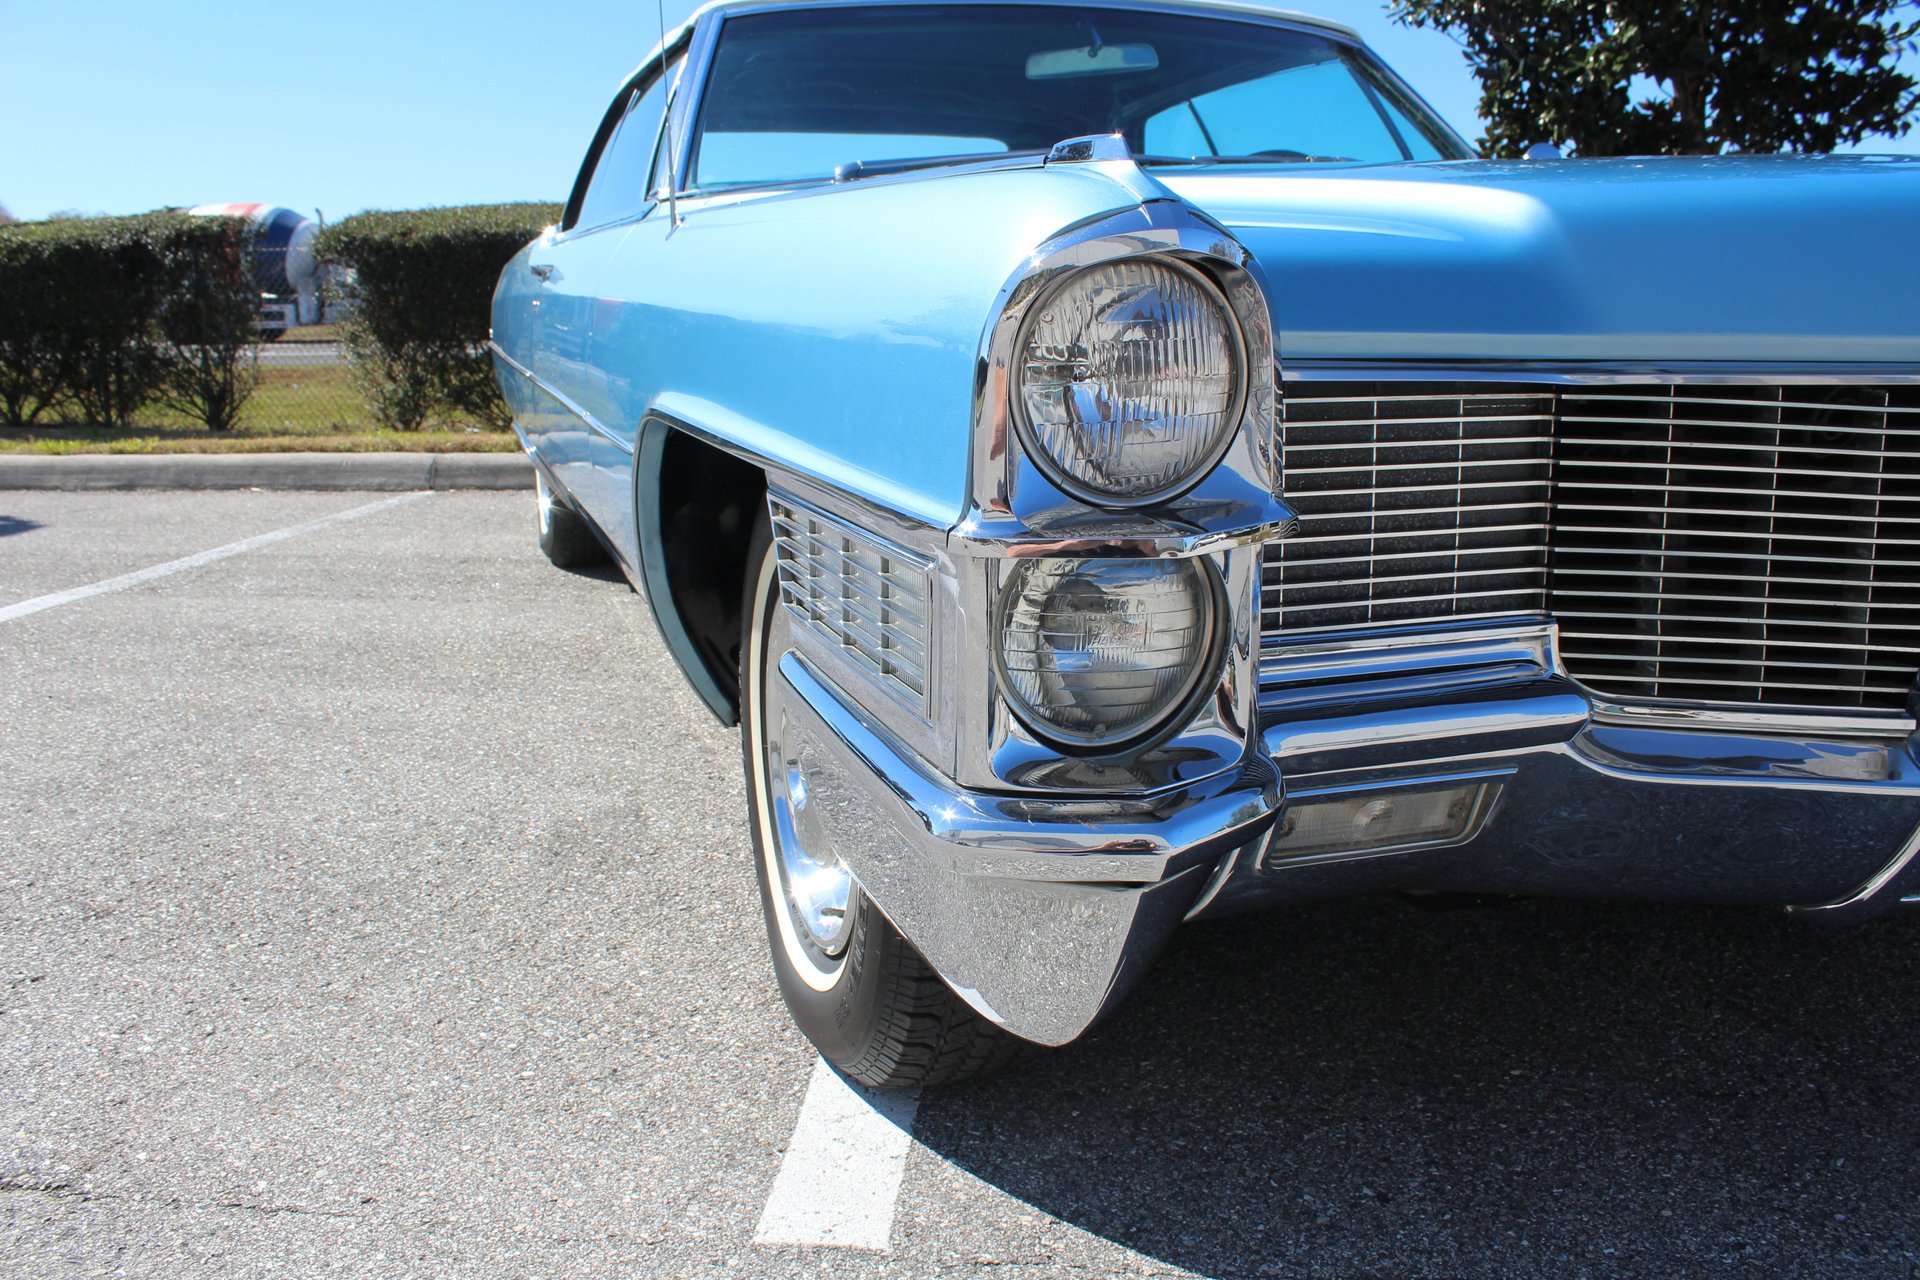 For Sale 1965 Cadillac Convertible